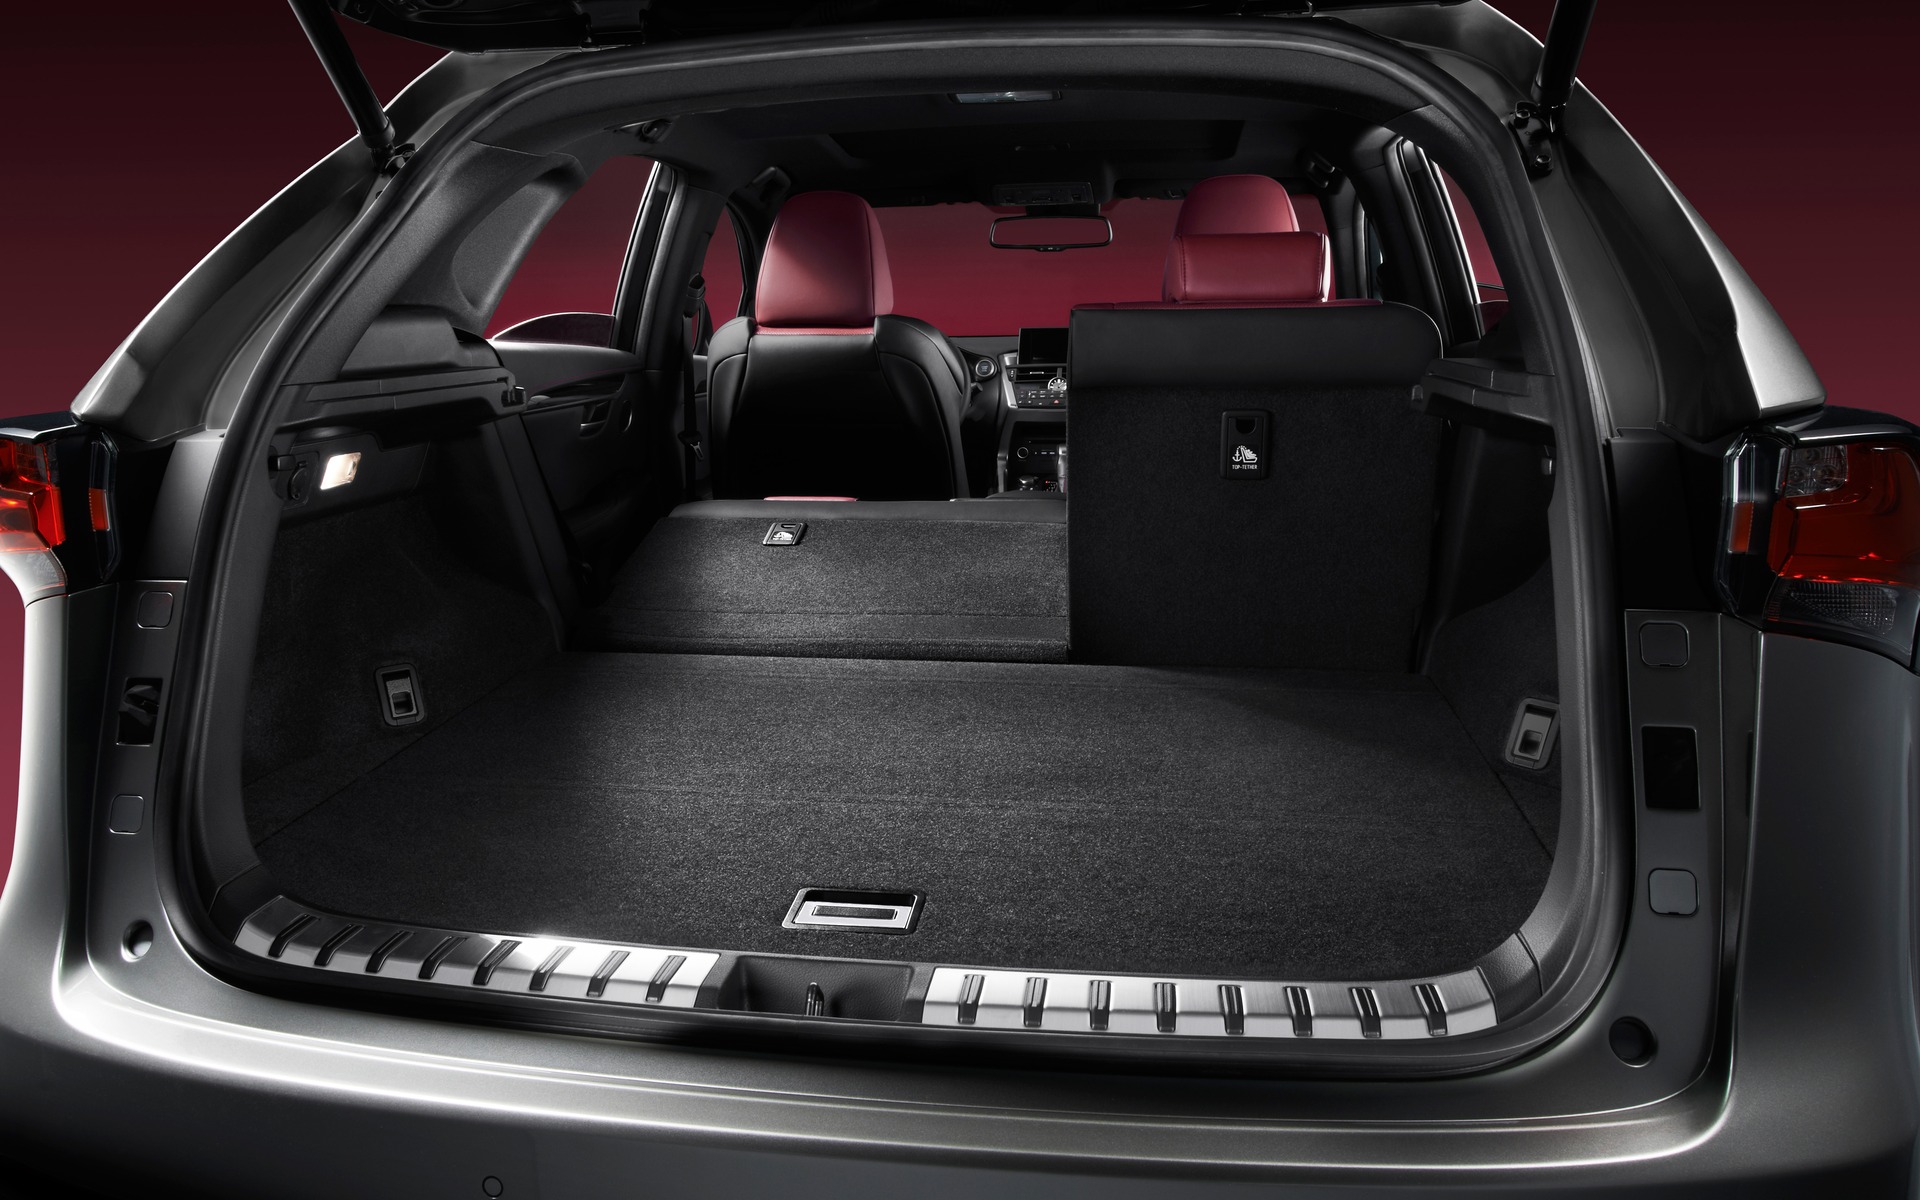 Cargo space is generous inside the NX 300h.